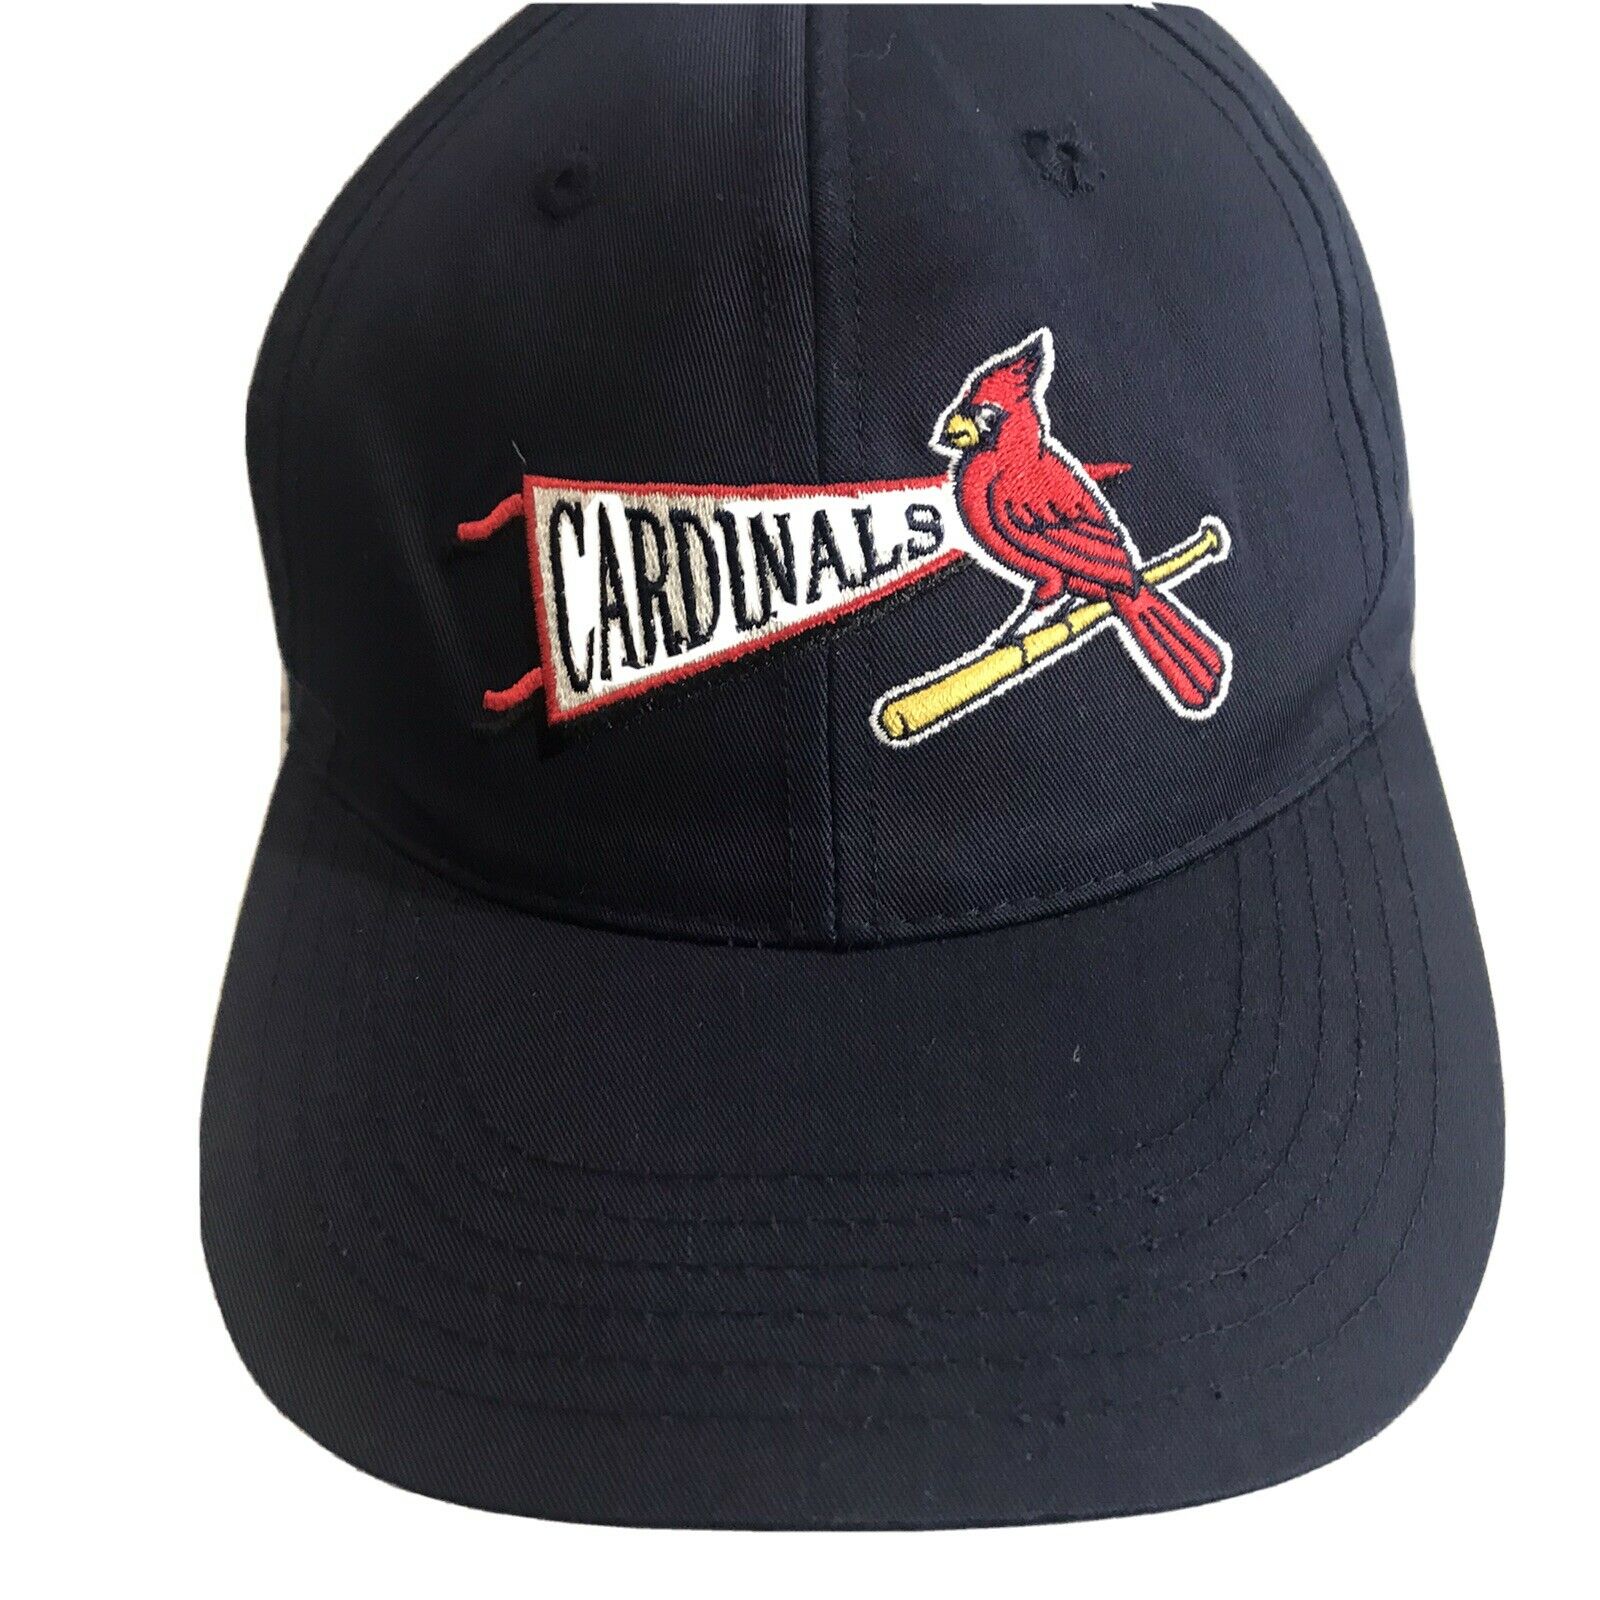 Saint Louis Cardinals Snapback Outdoor Youth Cap Vintage Blue Embroidered